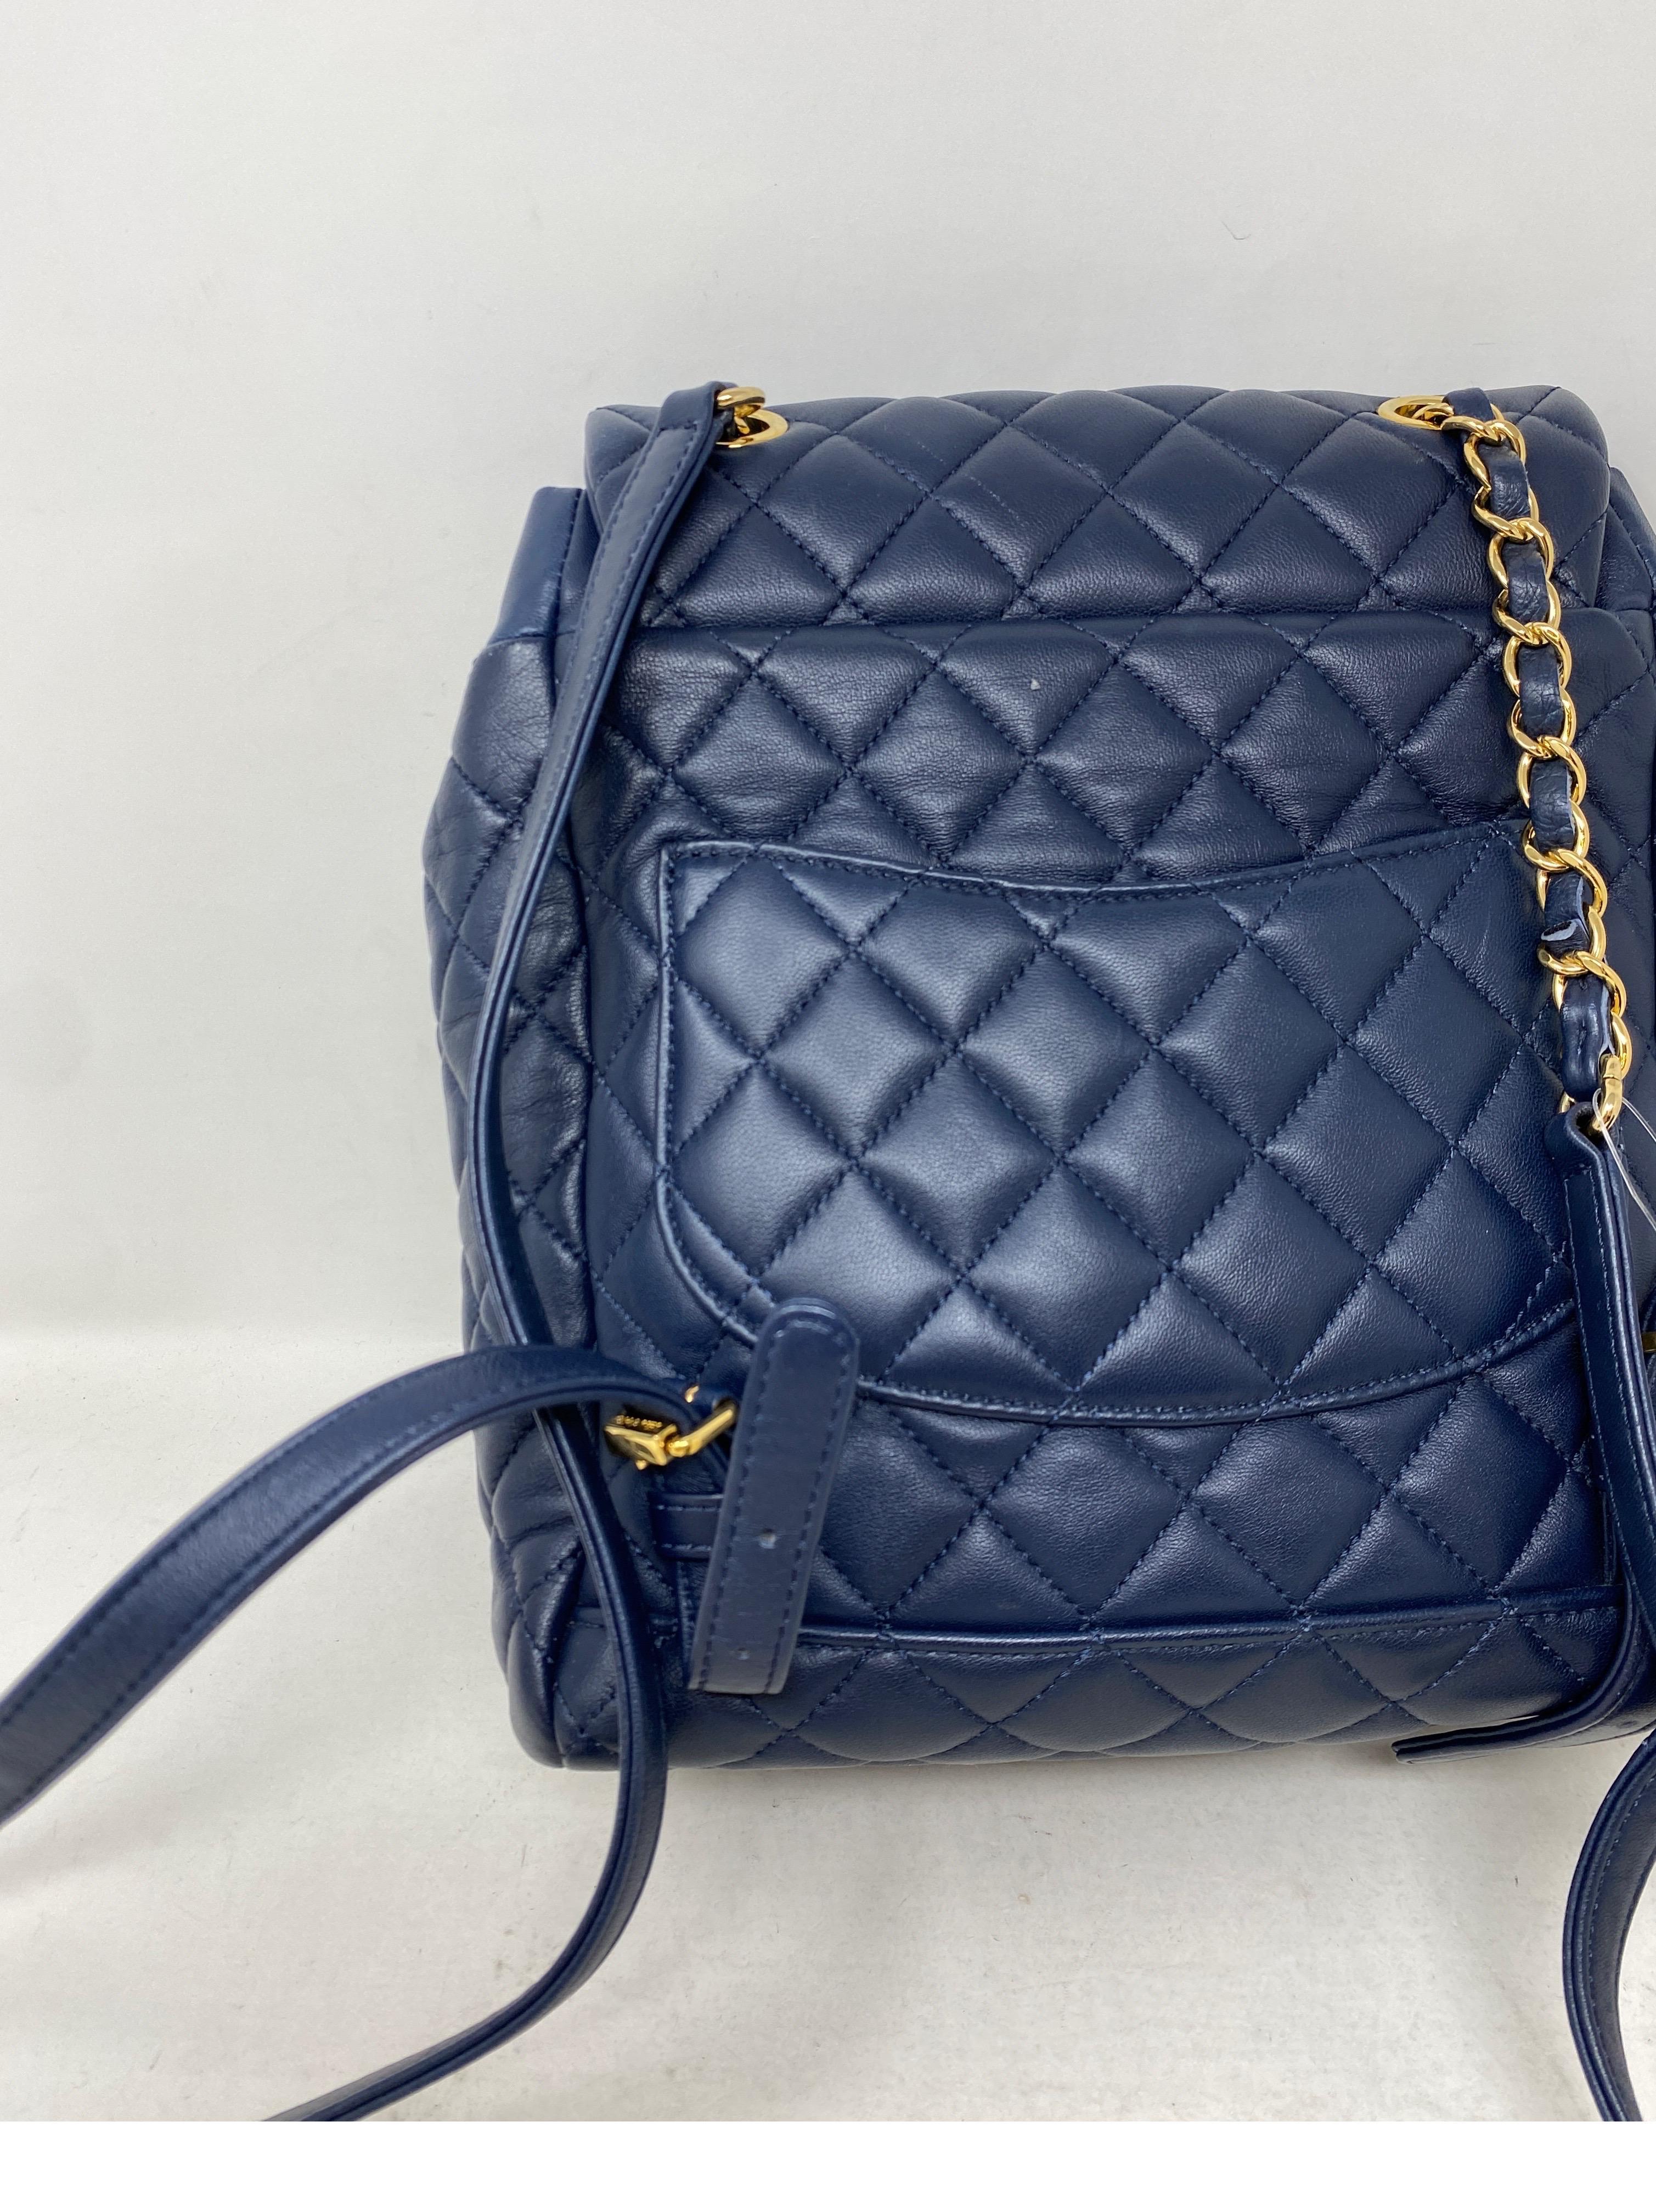 Women's or Men's Chanel Navy Leather Backpack 